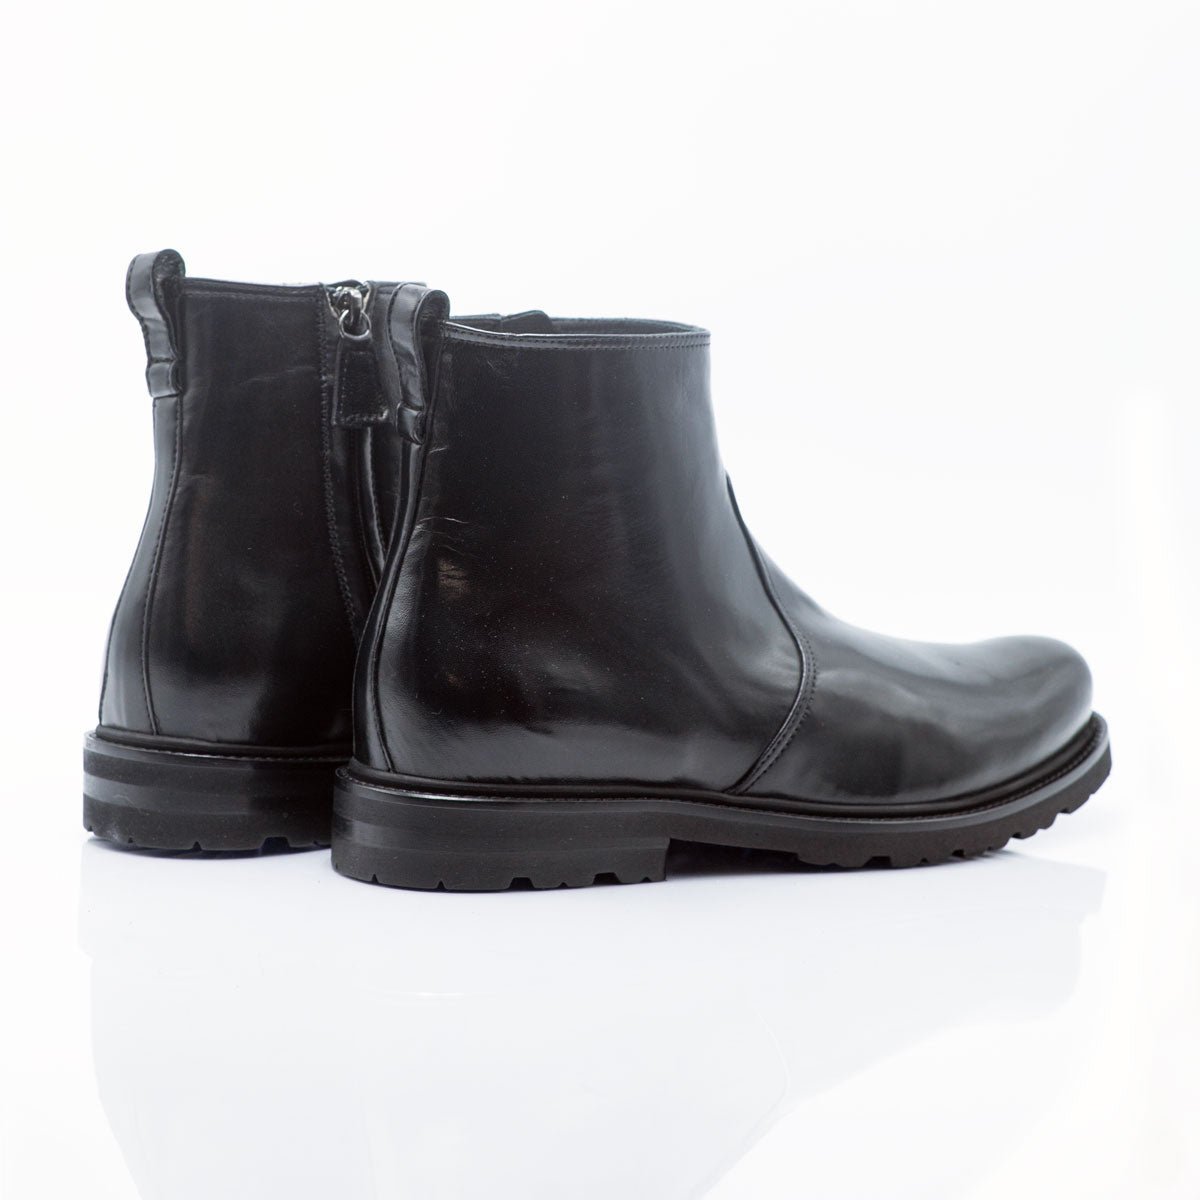 Figini - Black Nappa leather Ankle Boot with Gumlight